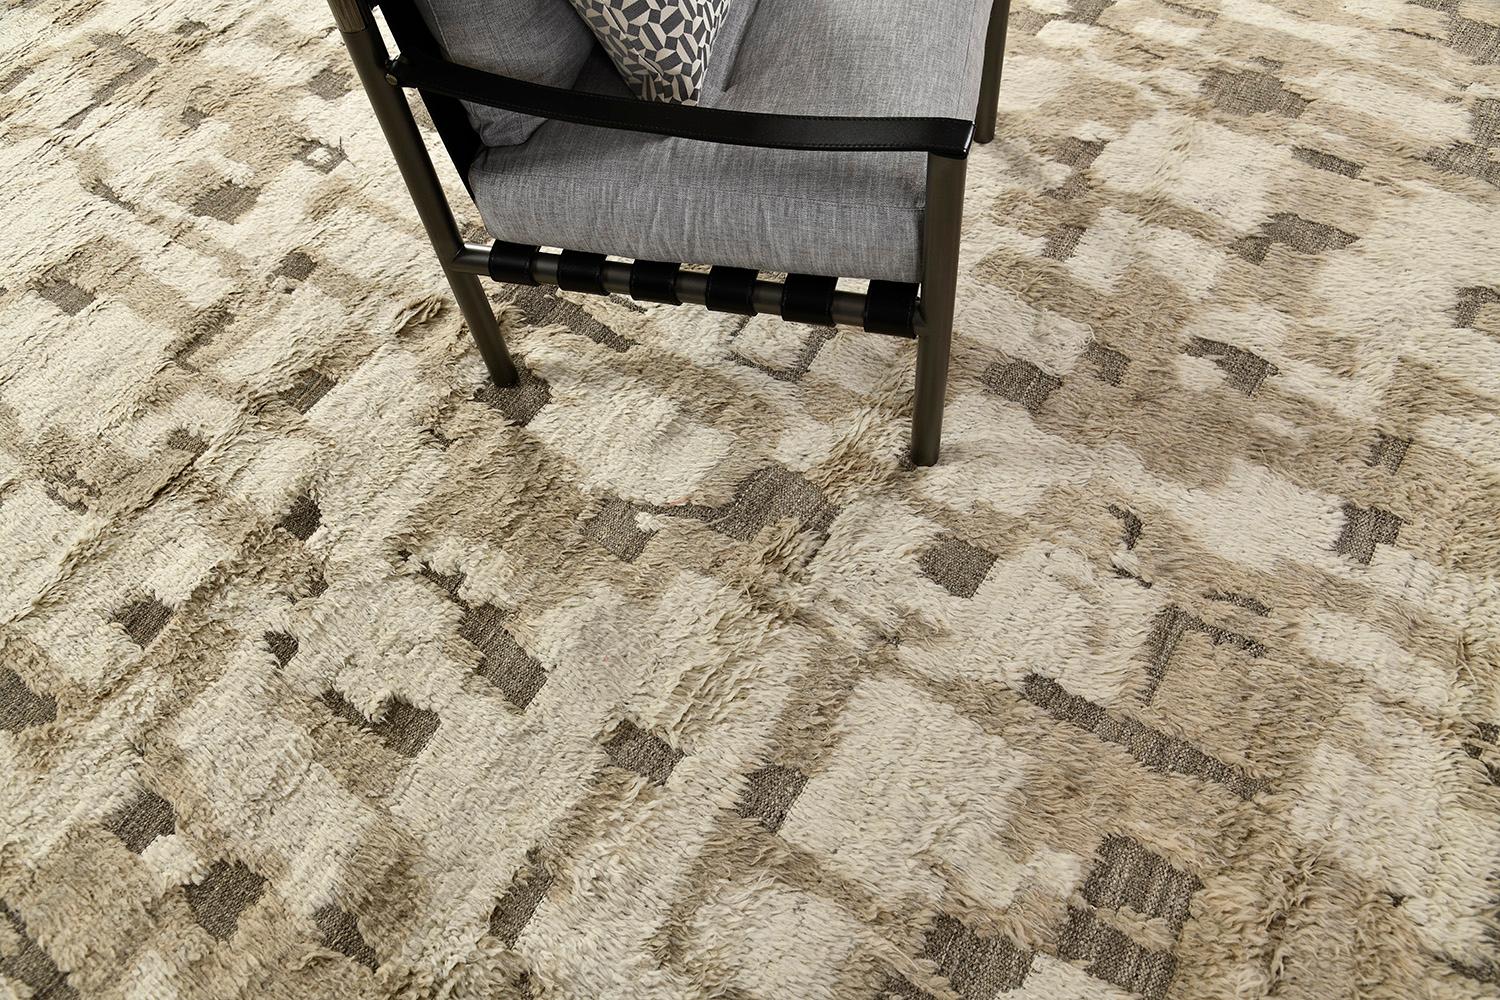 The Deverpa rug is a handwoven wool piece inspired by vintage Scandinavian design elements and recreated for the modern design world. The rug's shag balance and harmony, handwoven with a neutral flat weave and extraordinary piles of camouflage. This